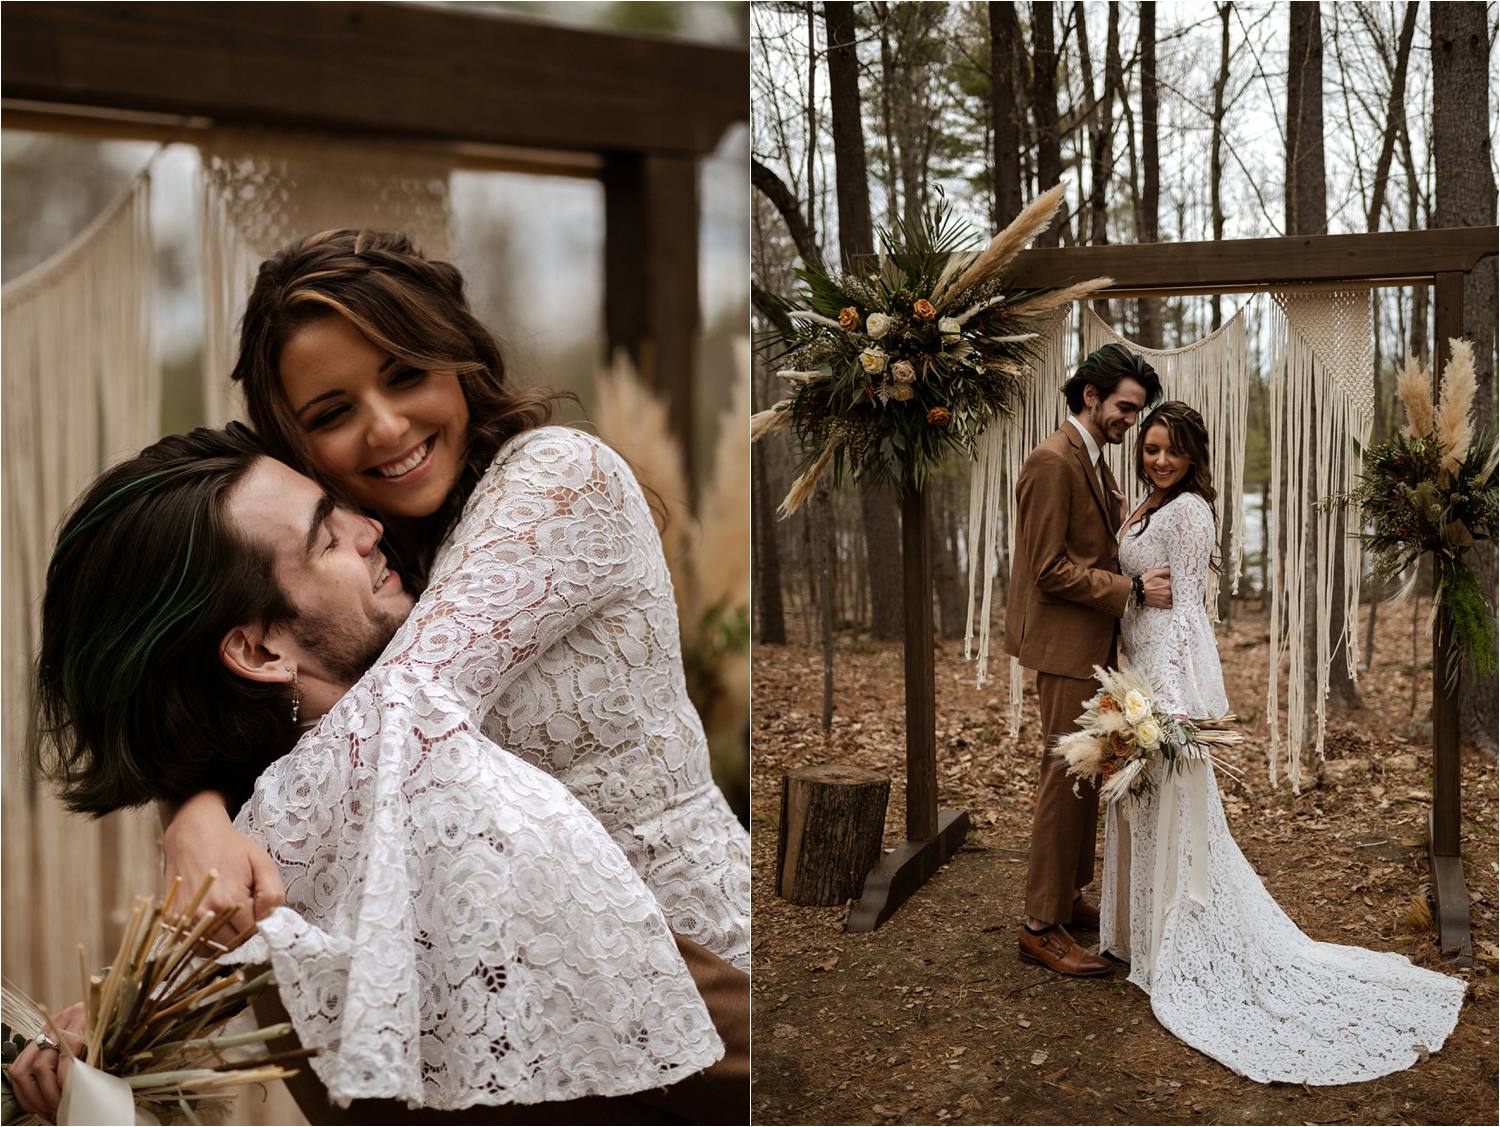 Fun bride and groom portraits at Boho Maine Elopement